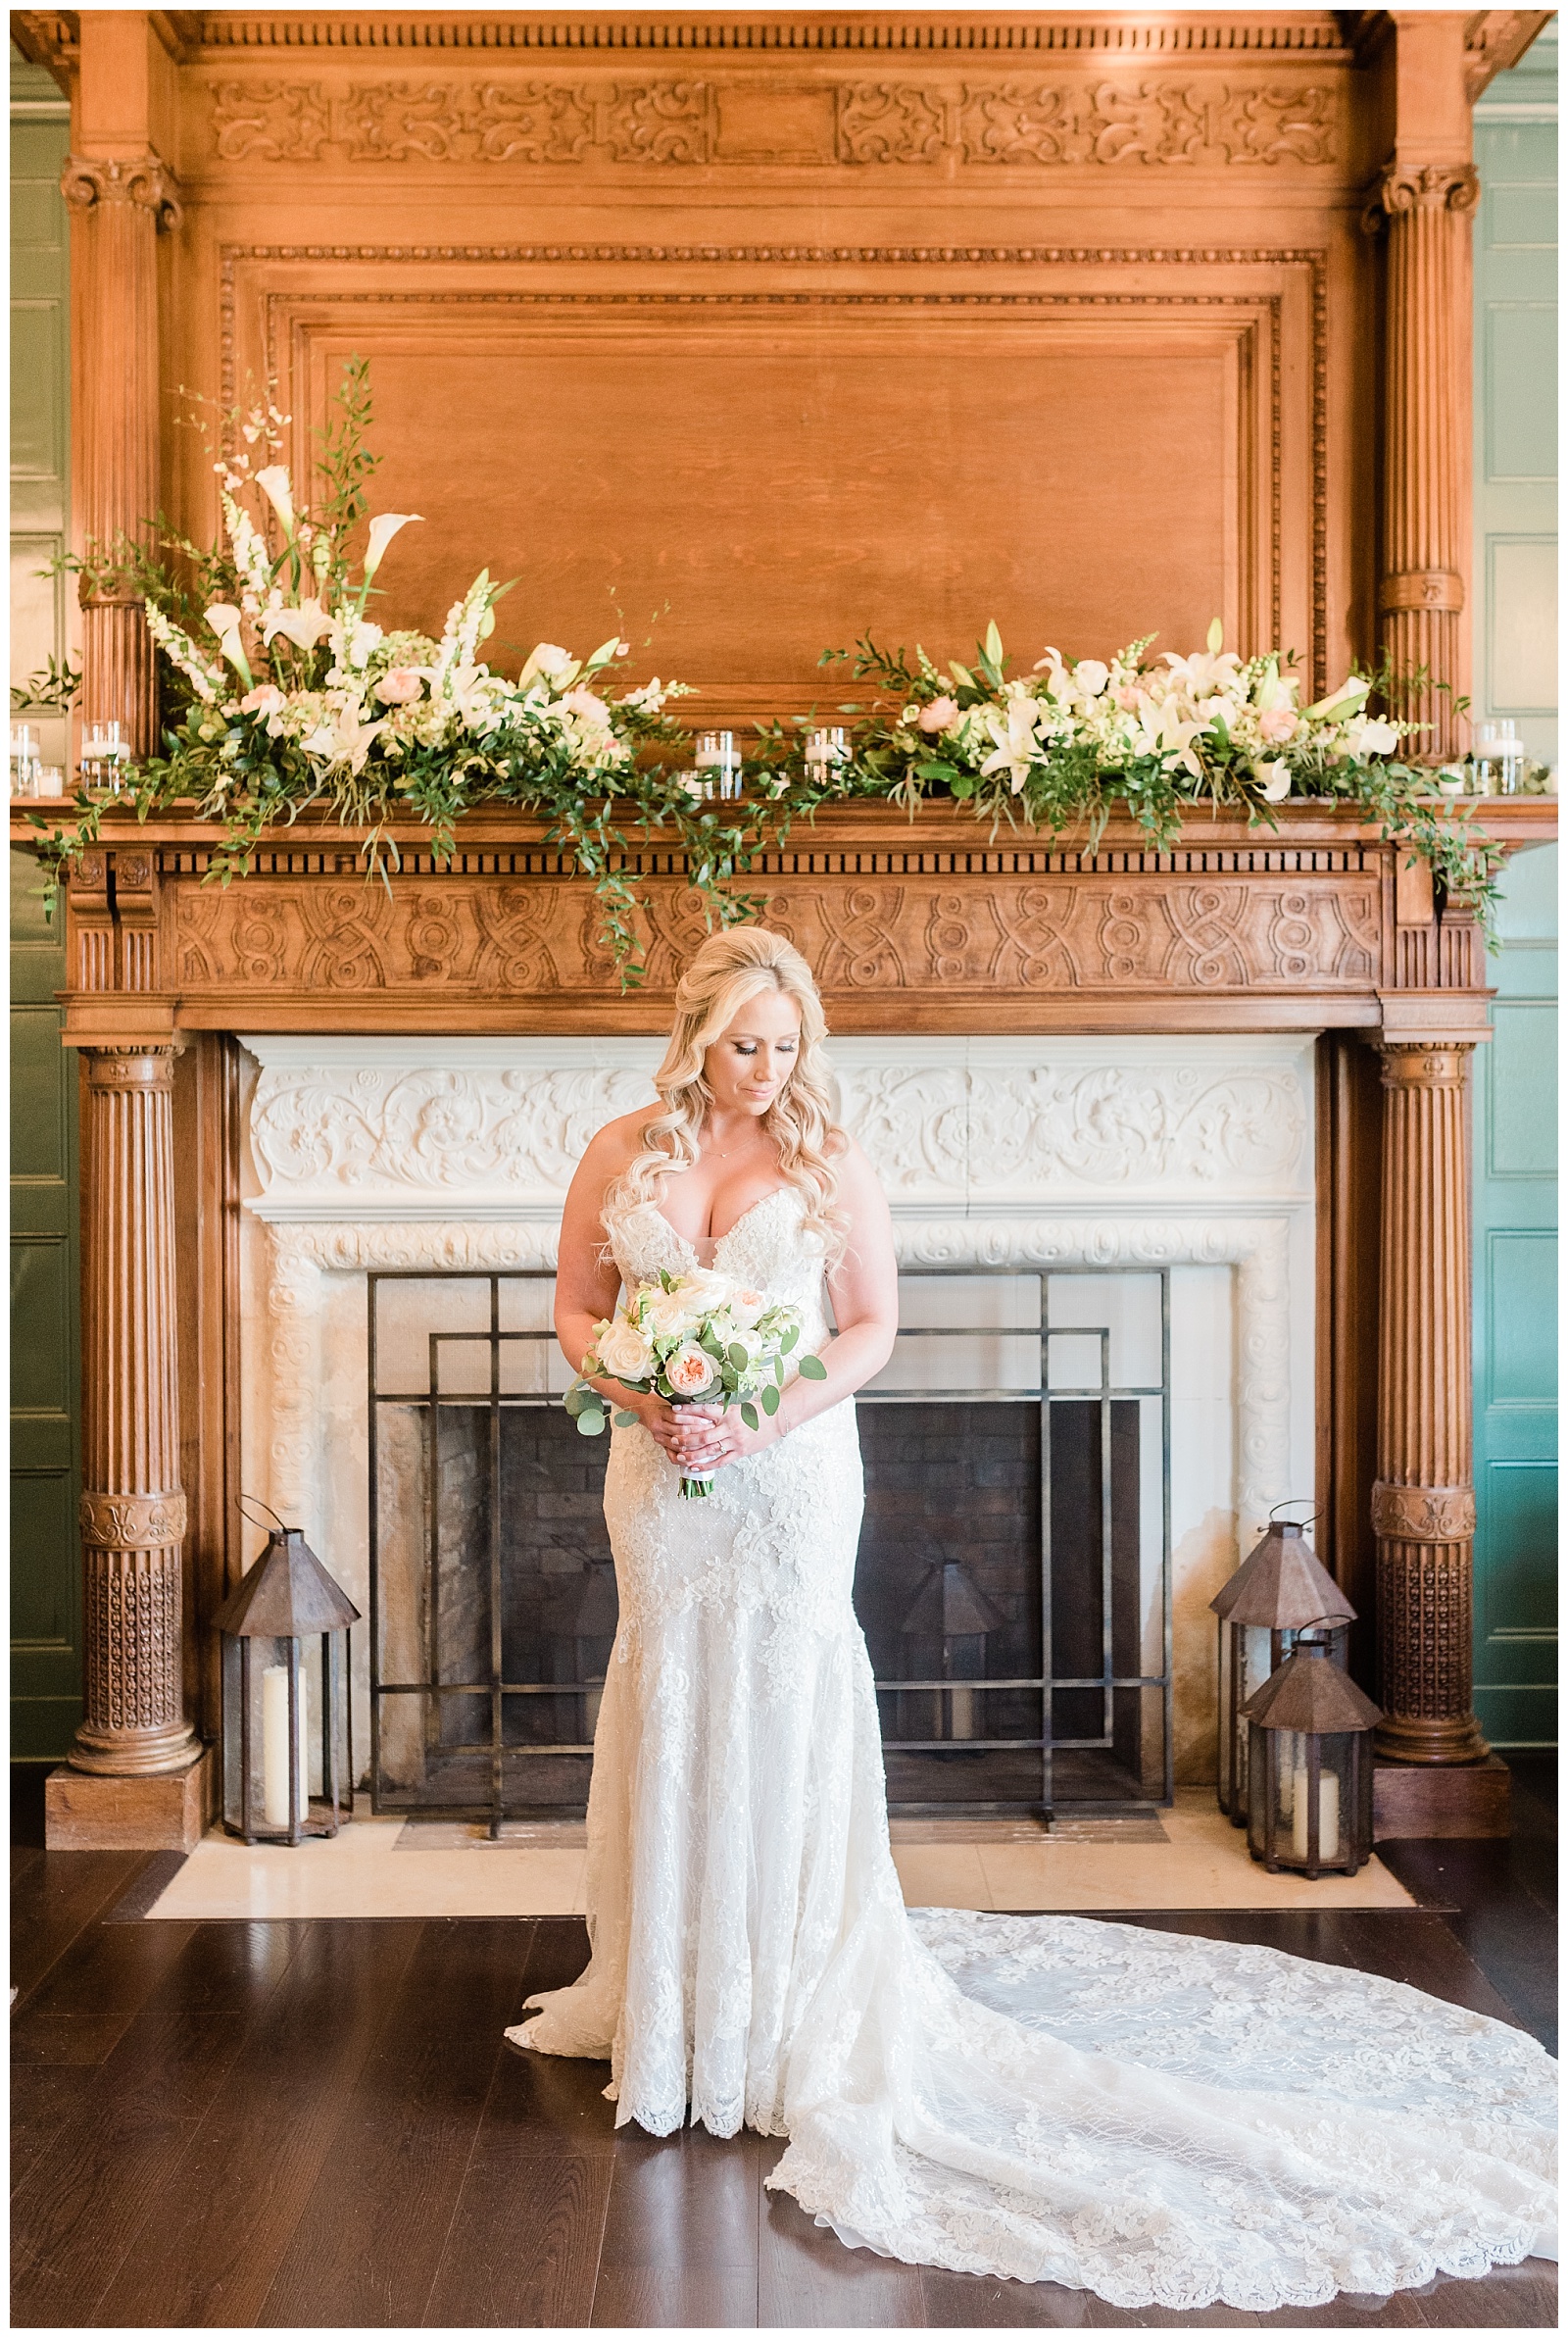 A bride holds her bouquet in front of a floral covered fireplace in the Mansion at Natirar.